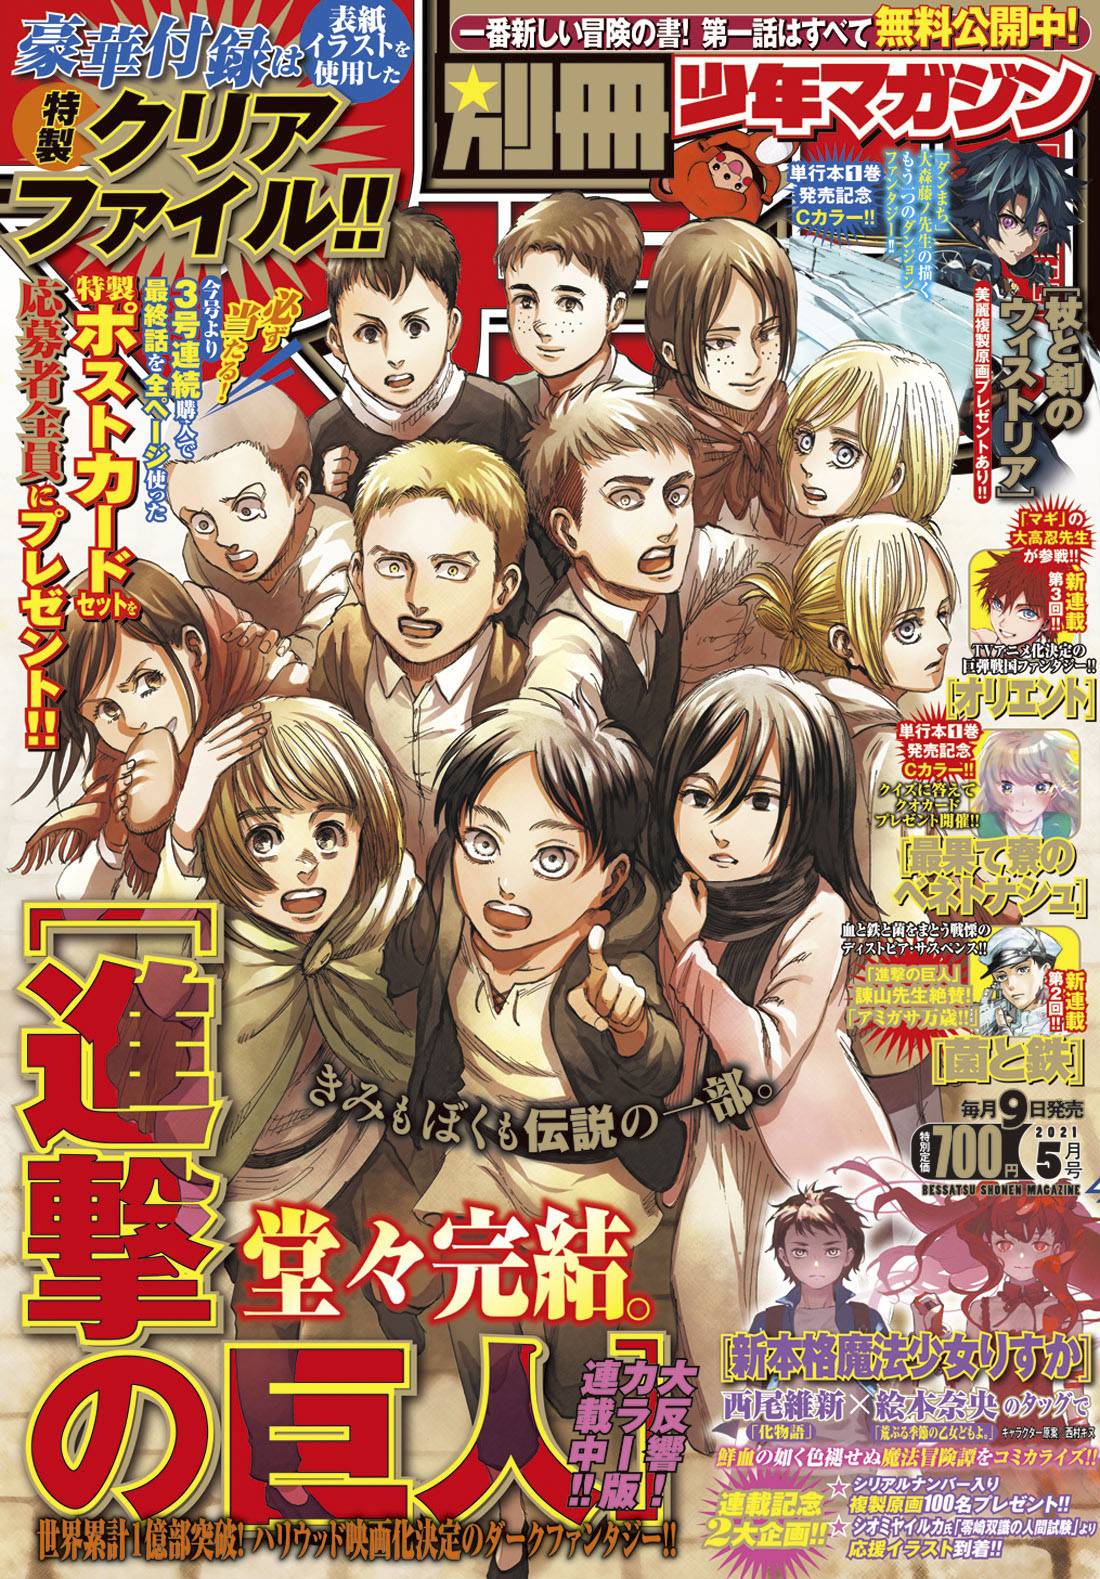 Attack On Titan 5 Reasons The Manga Ending Was Perfect 5 It Wasnt